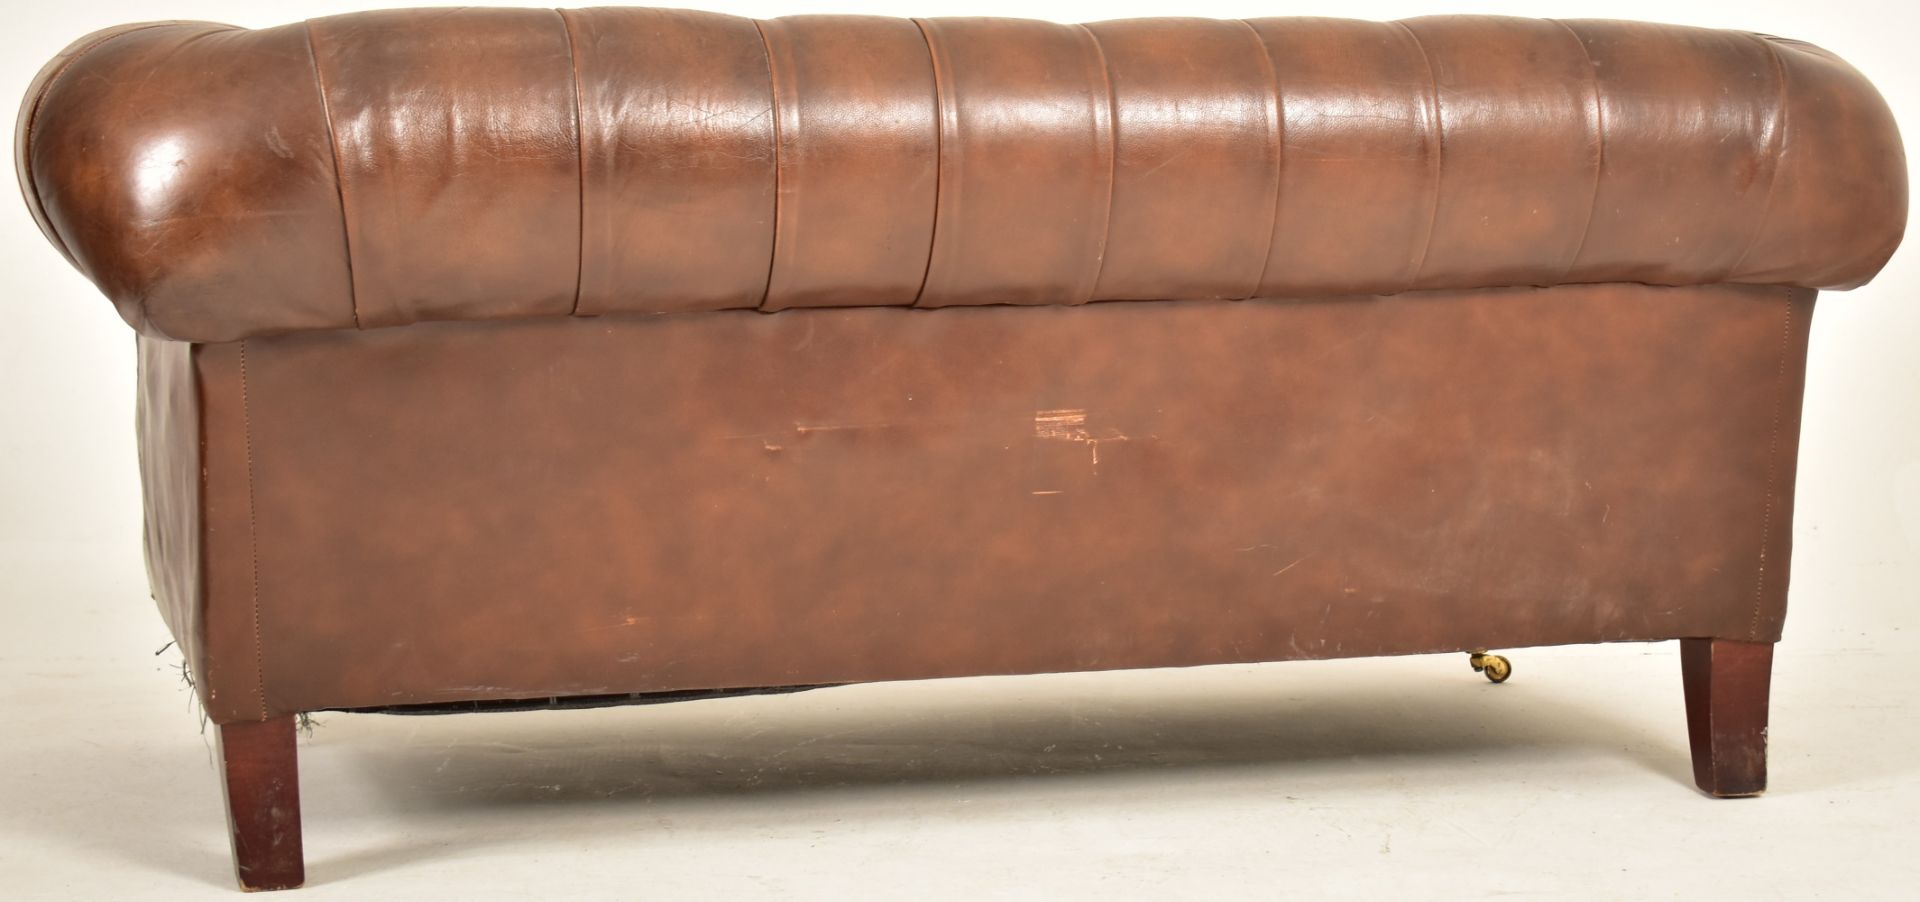 CONTEMPORARY BROWN LEATHER CHESTERFIELD SOFA - Image 7 of 7